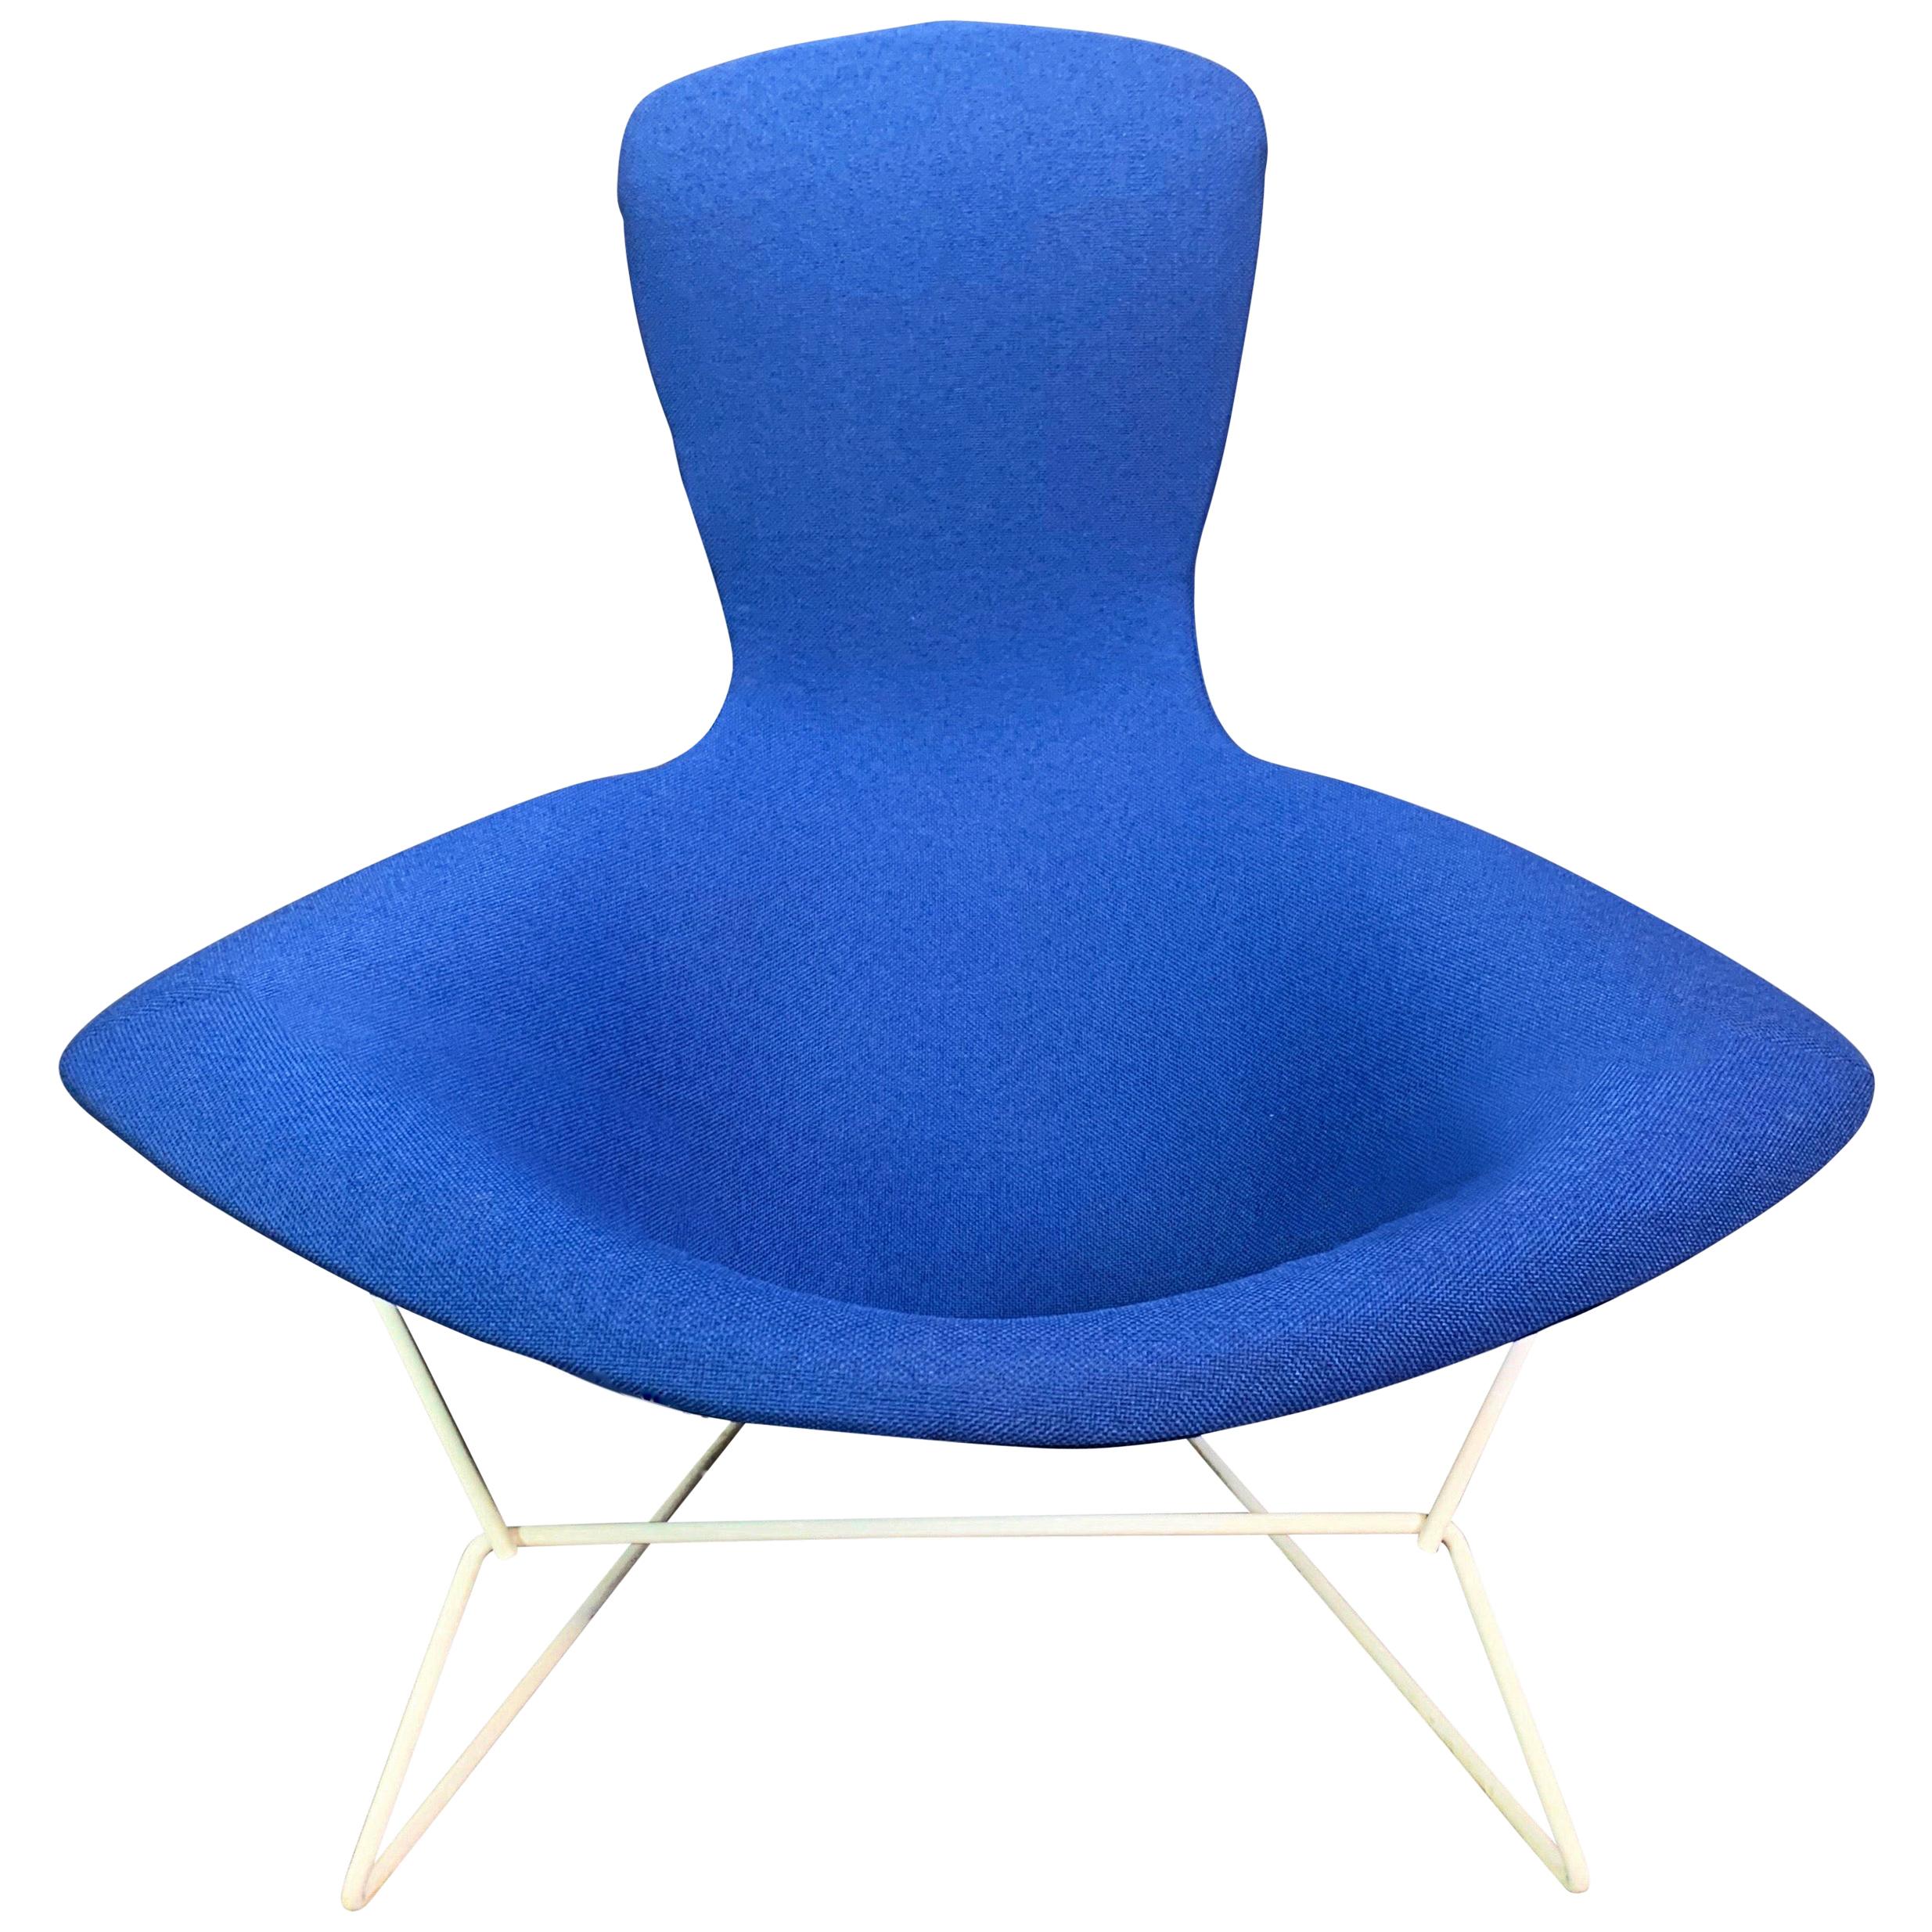 Vintage Mid-Century Modern "Bird" Chair by Harry Bertoia for Knoll For Sale